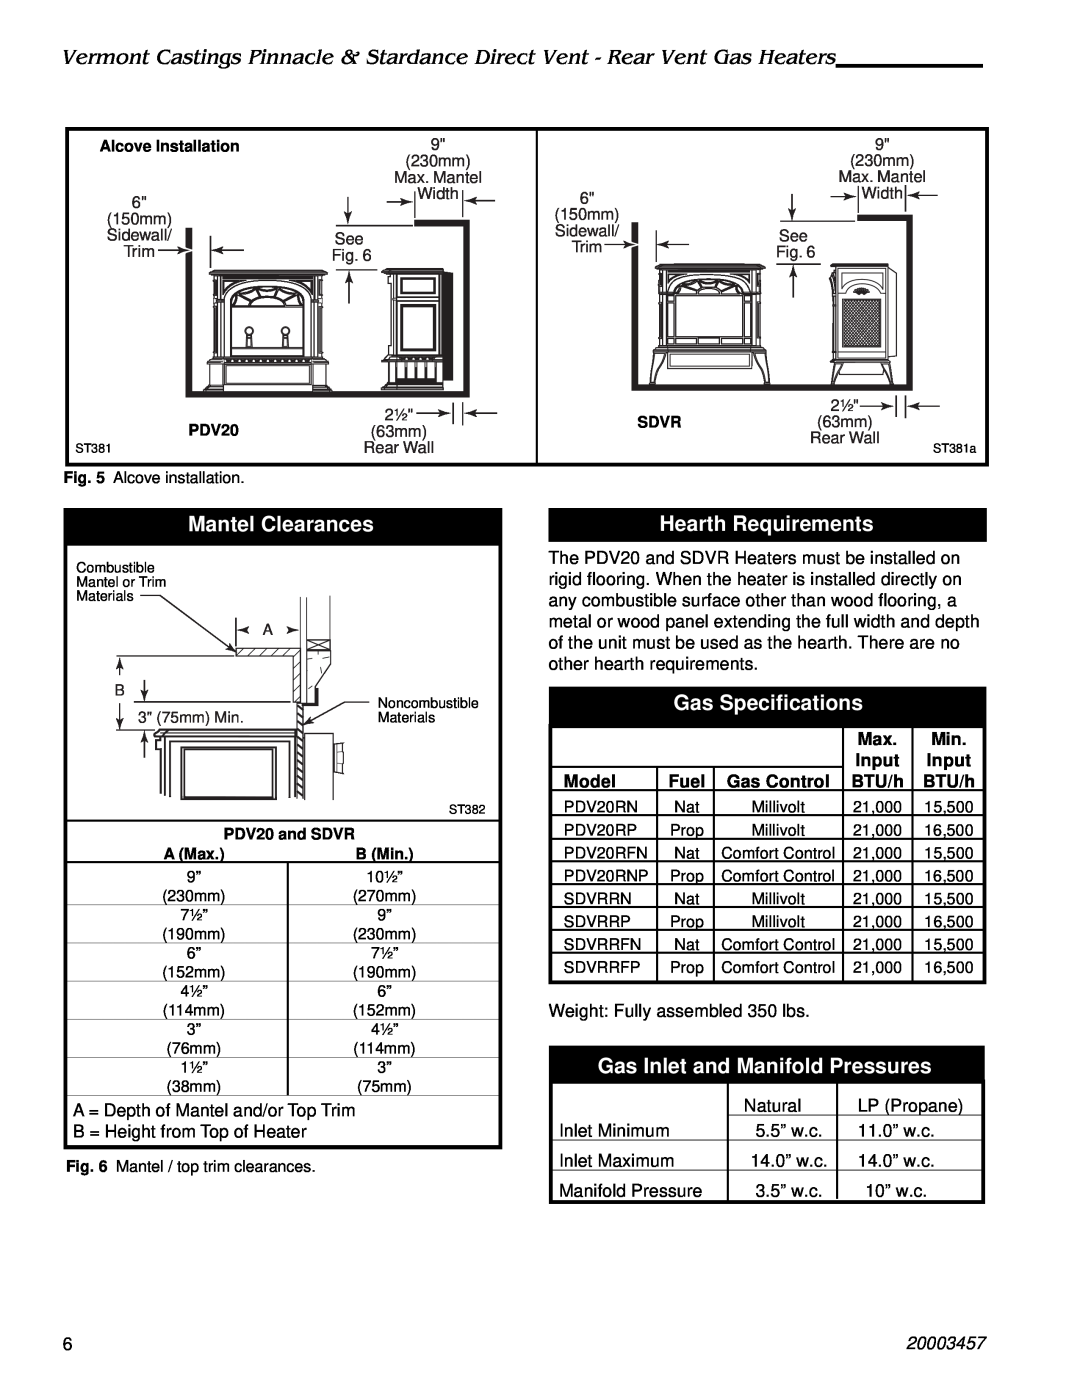 Vermont Casting 2950, 2951 Mantel Clearances, Hearth Requirements, Gas Specifications, Gas Inlet and Manifold Pressures 